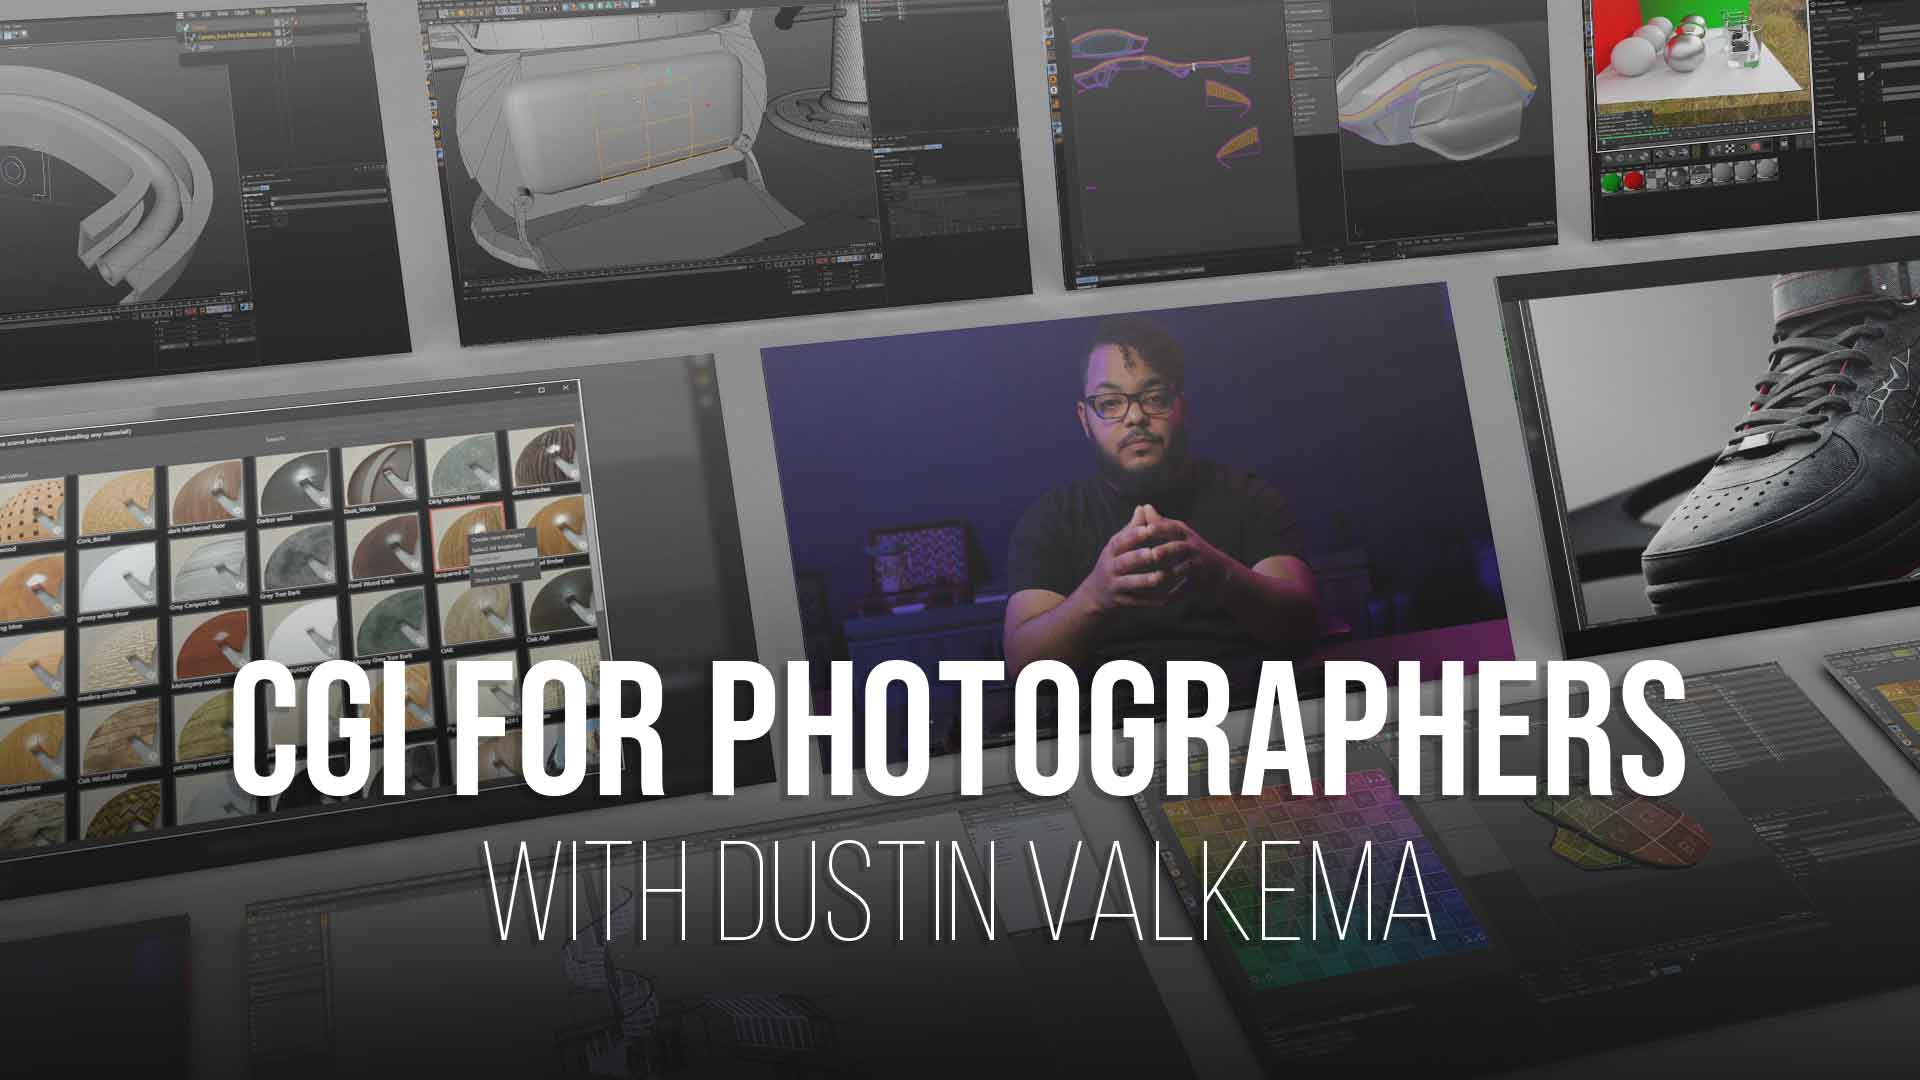 CGI For Photographers is an in depth tutorial brought to you by PRO EDU. Dustin Valkema is a professional photographer, digital artist and Cinema 4D Master trainer.